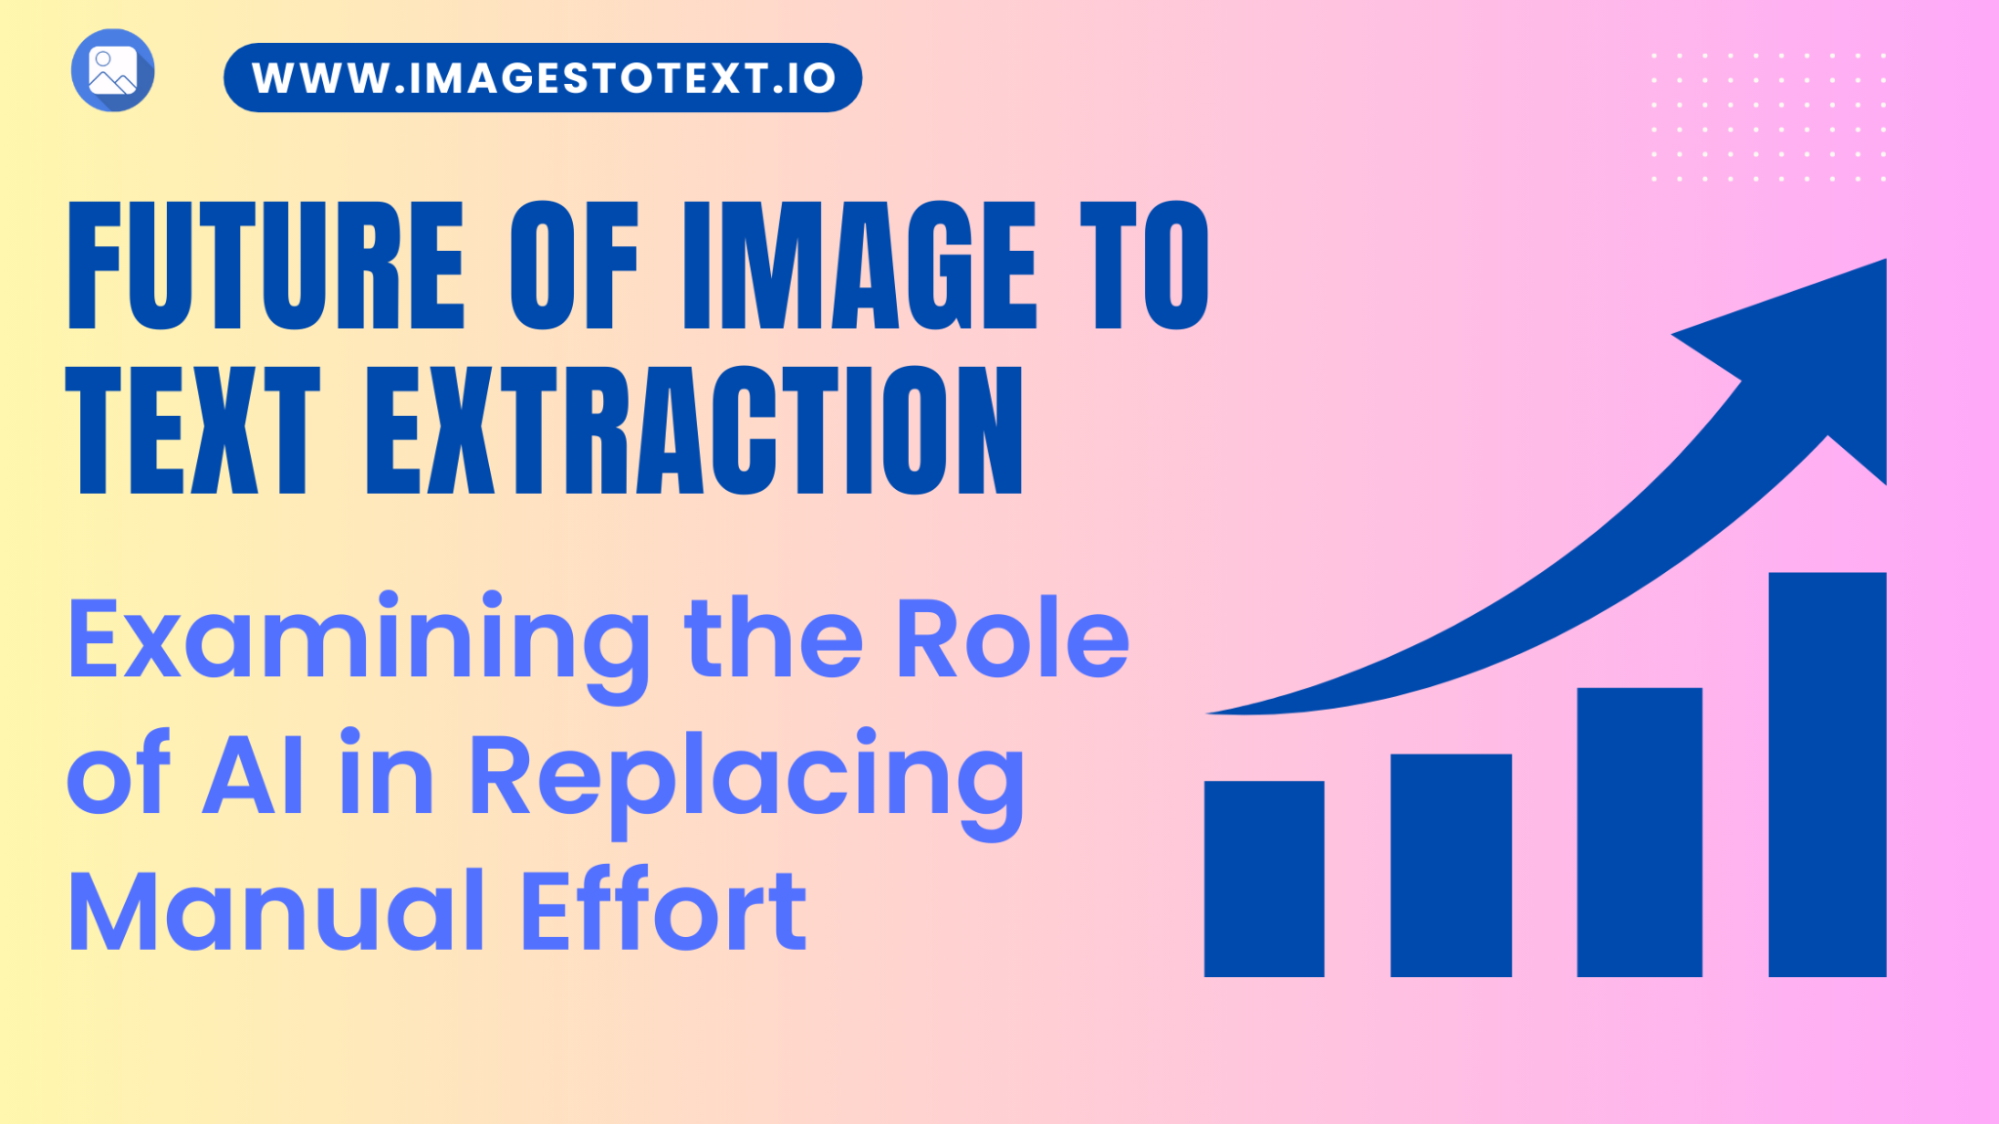 Future of Image to Text Extraction: Examining the Role of AI in Replacing Manual Effort